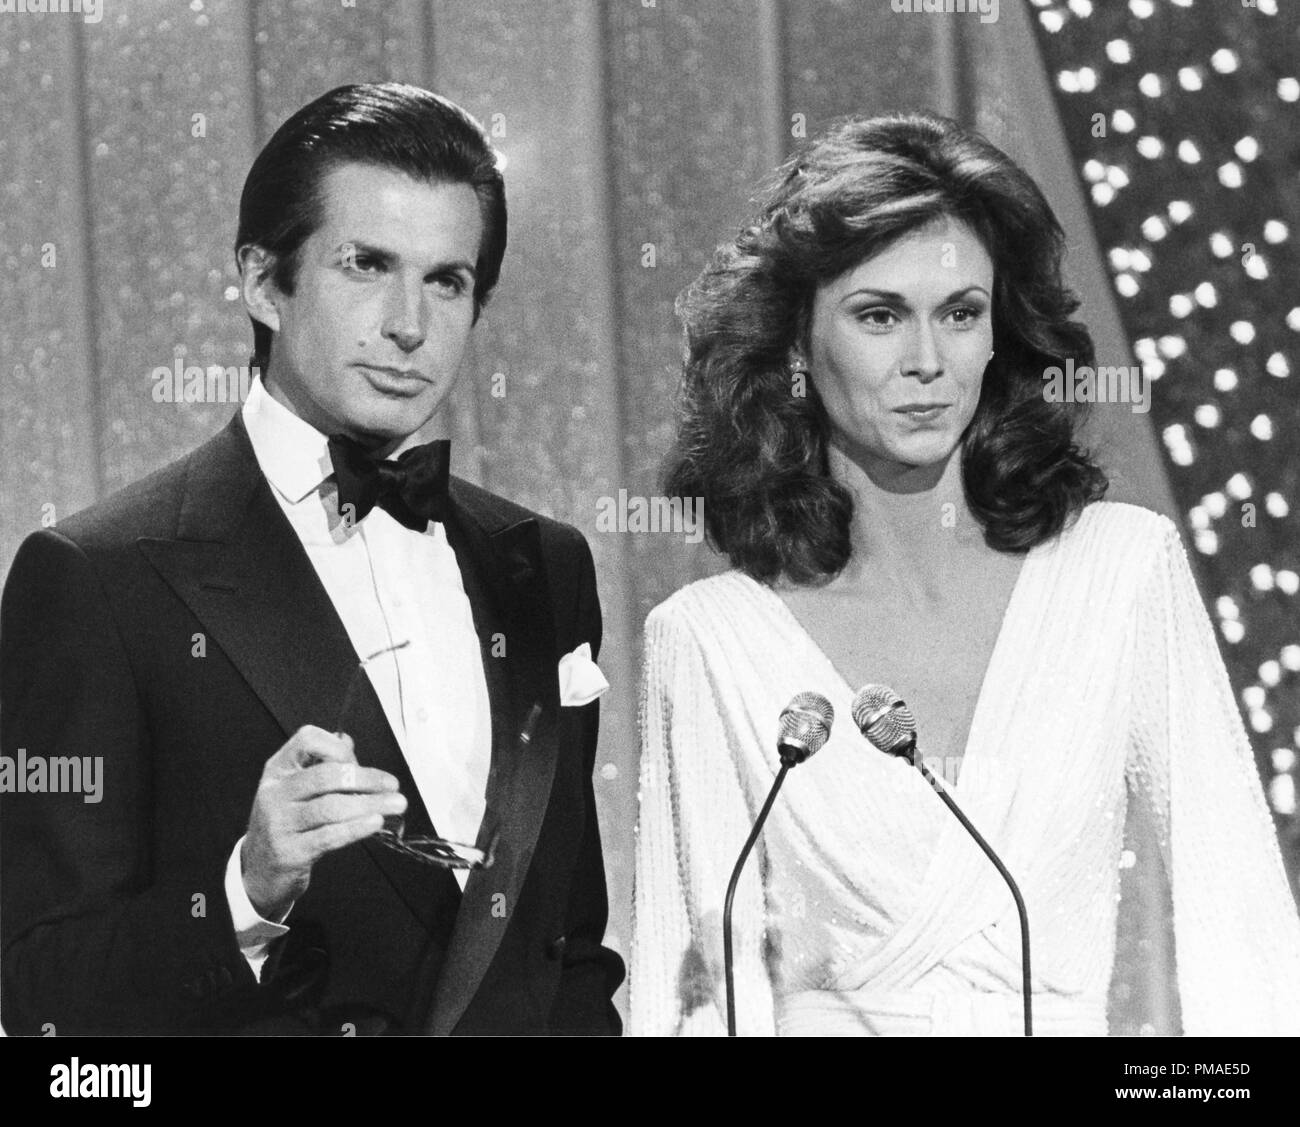 George Hamilton, Kate Jackson at the 38th Annual Golden Globe Awards, 1981  File Reference # 32509 591THA Stock Photo - Alamy